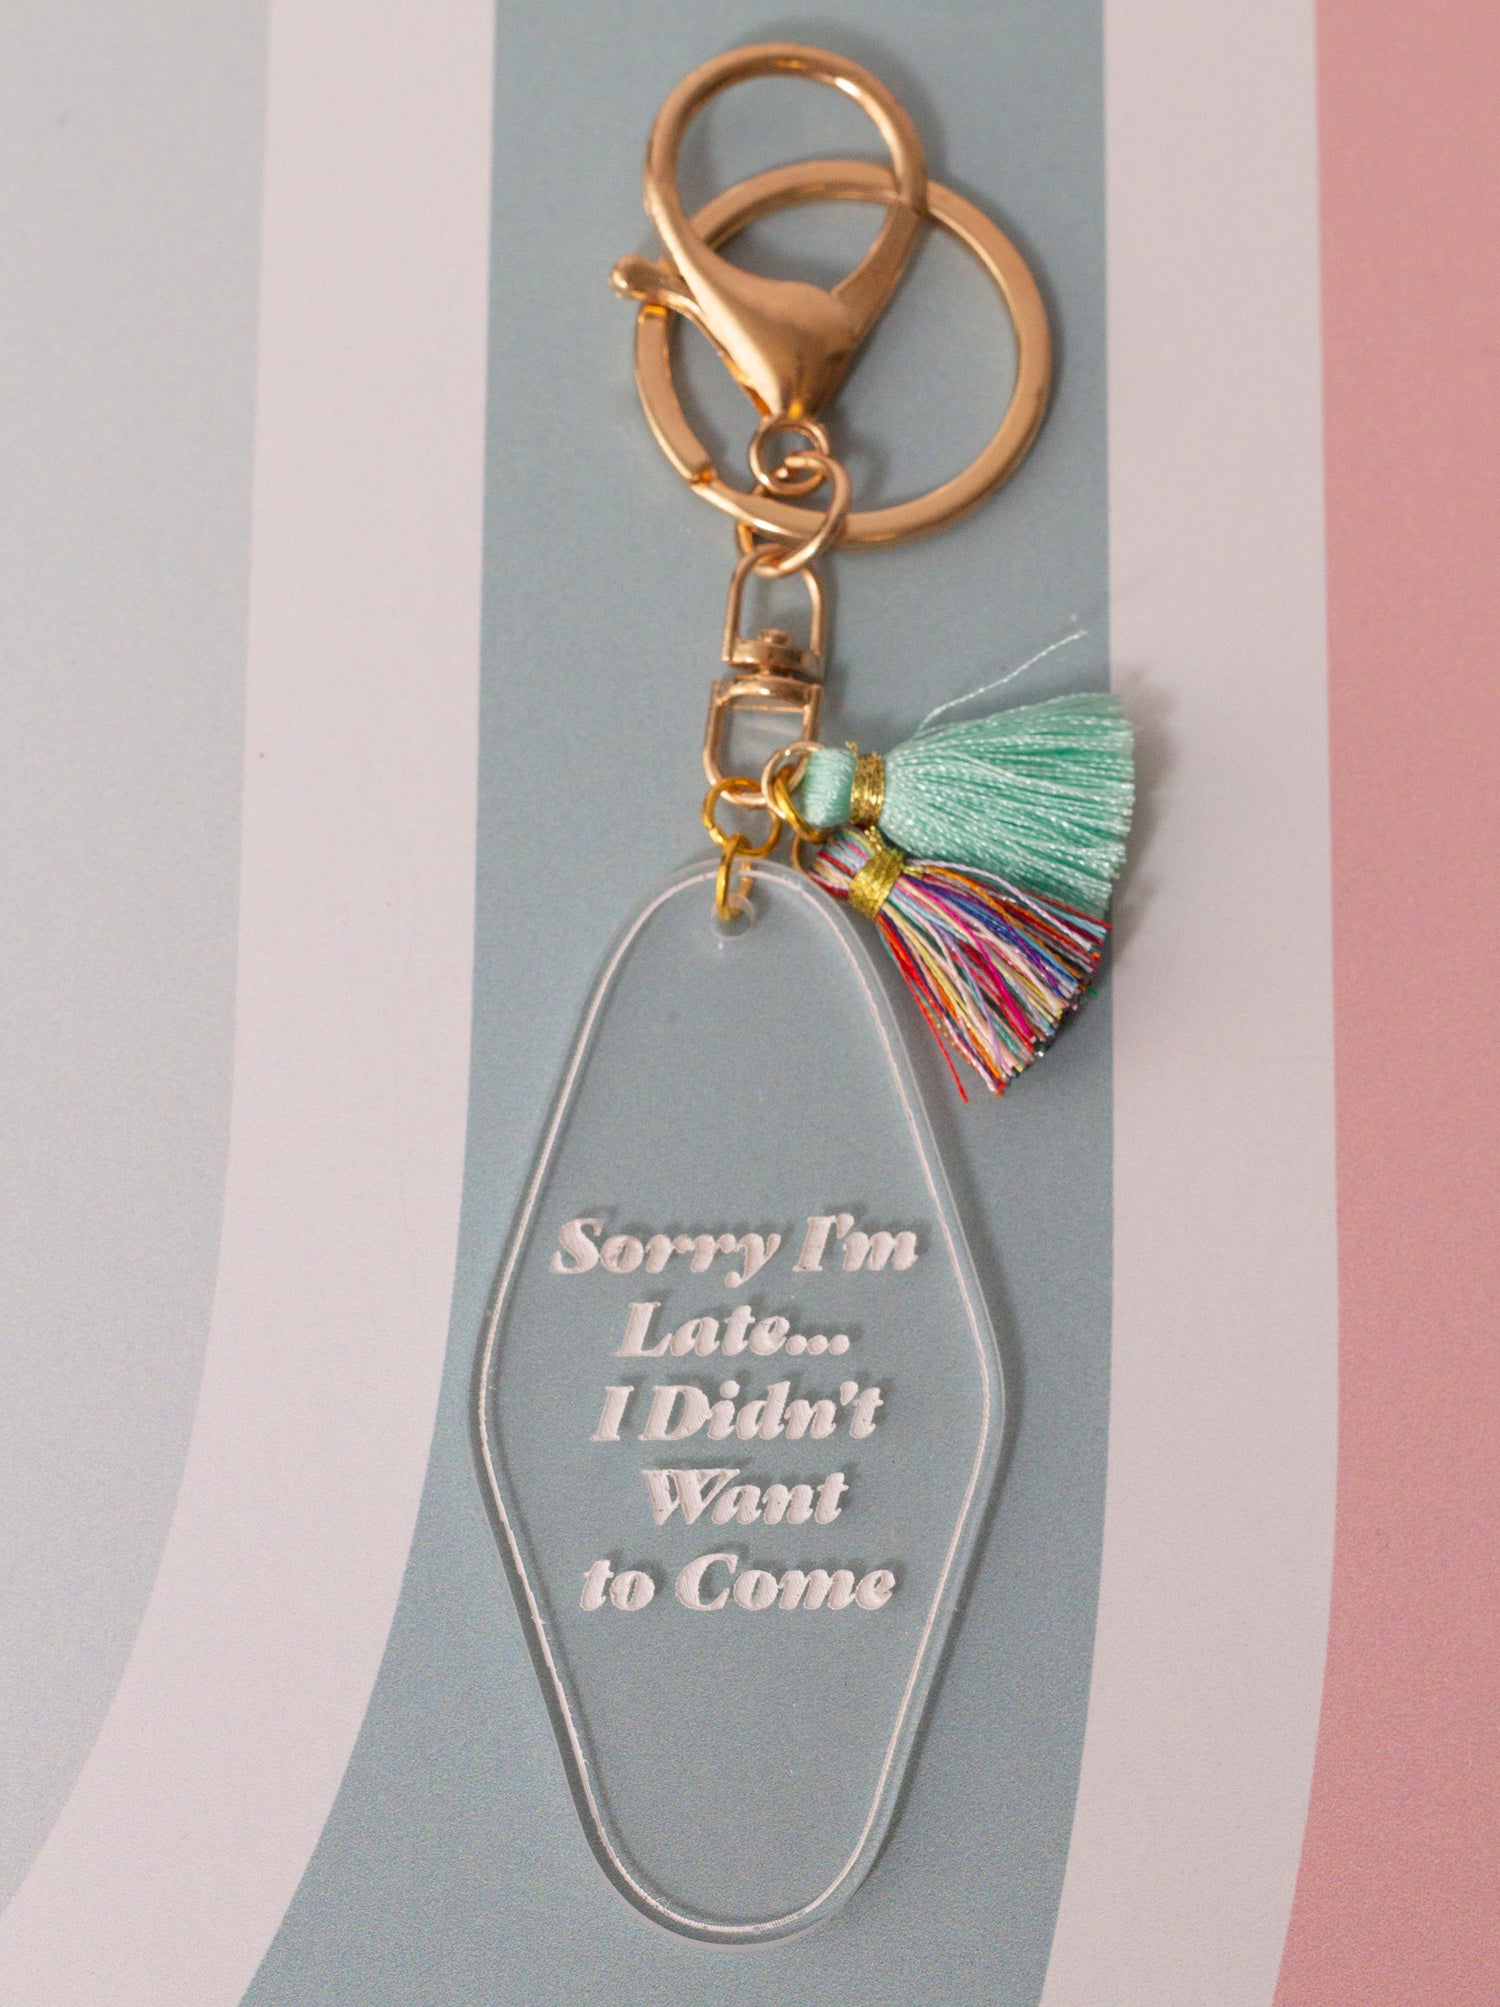 Sorry I'm Late... I Didn't Want to Come - Vintage Style Acrylic Keychain